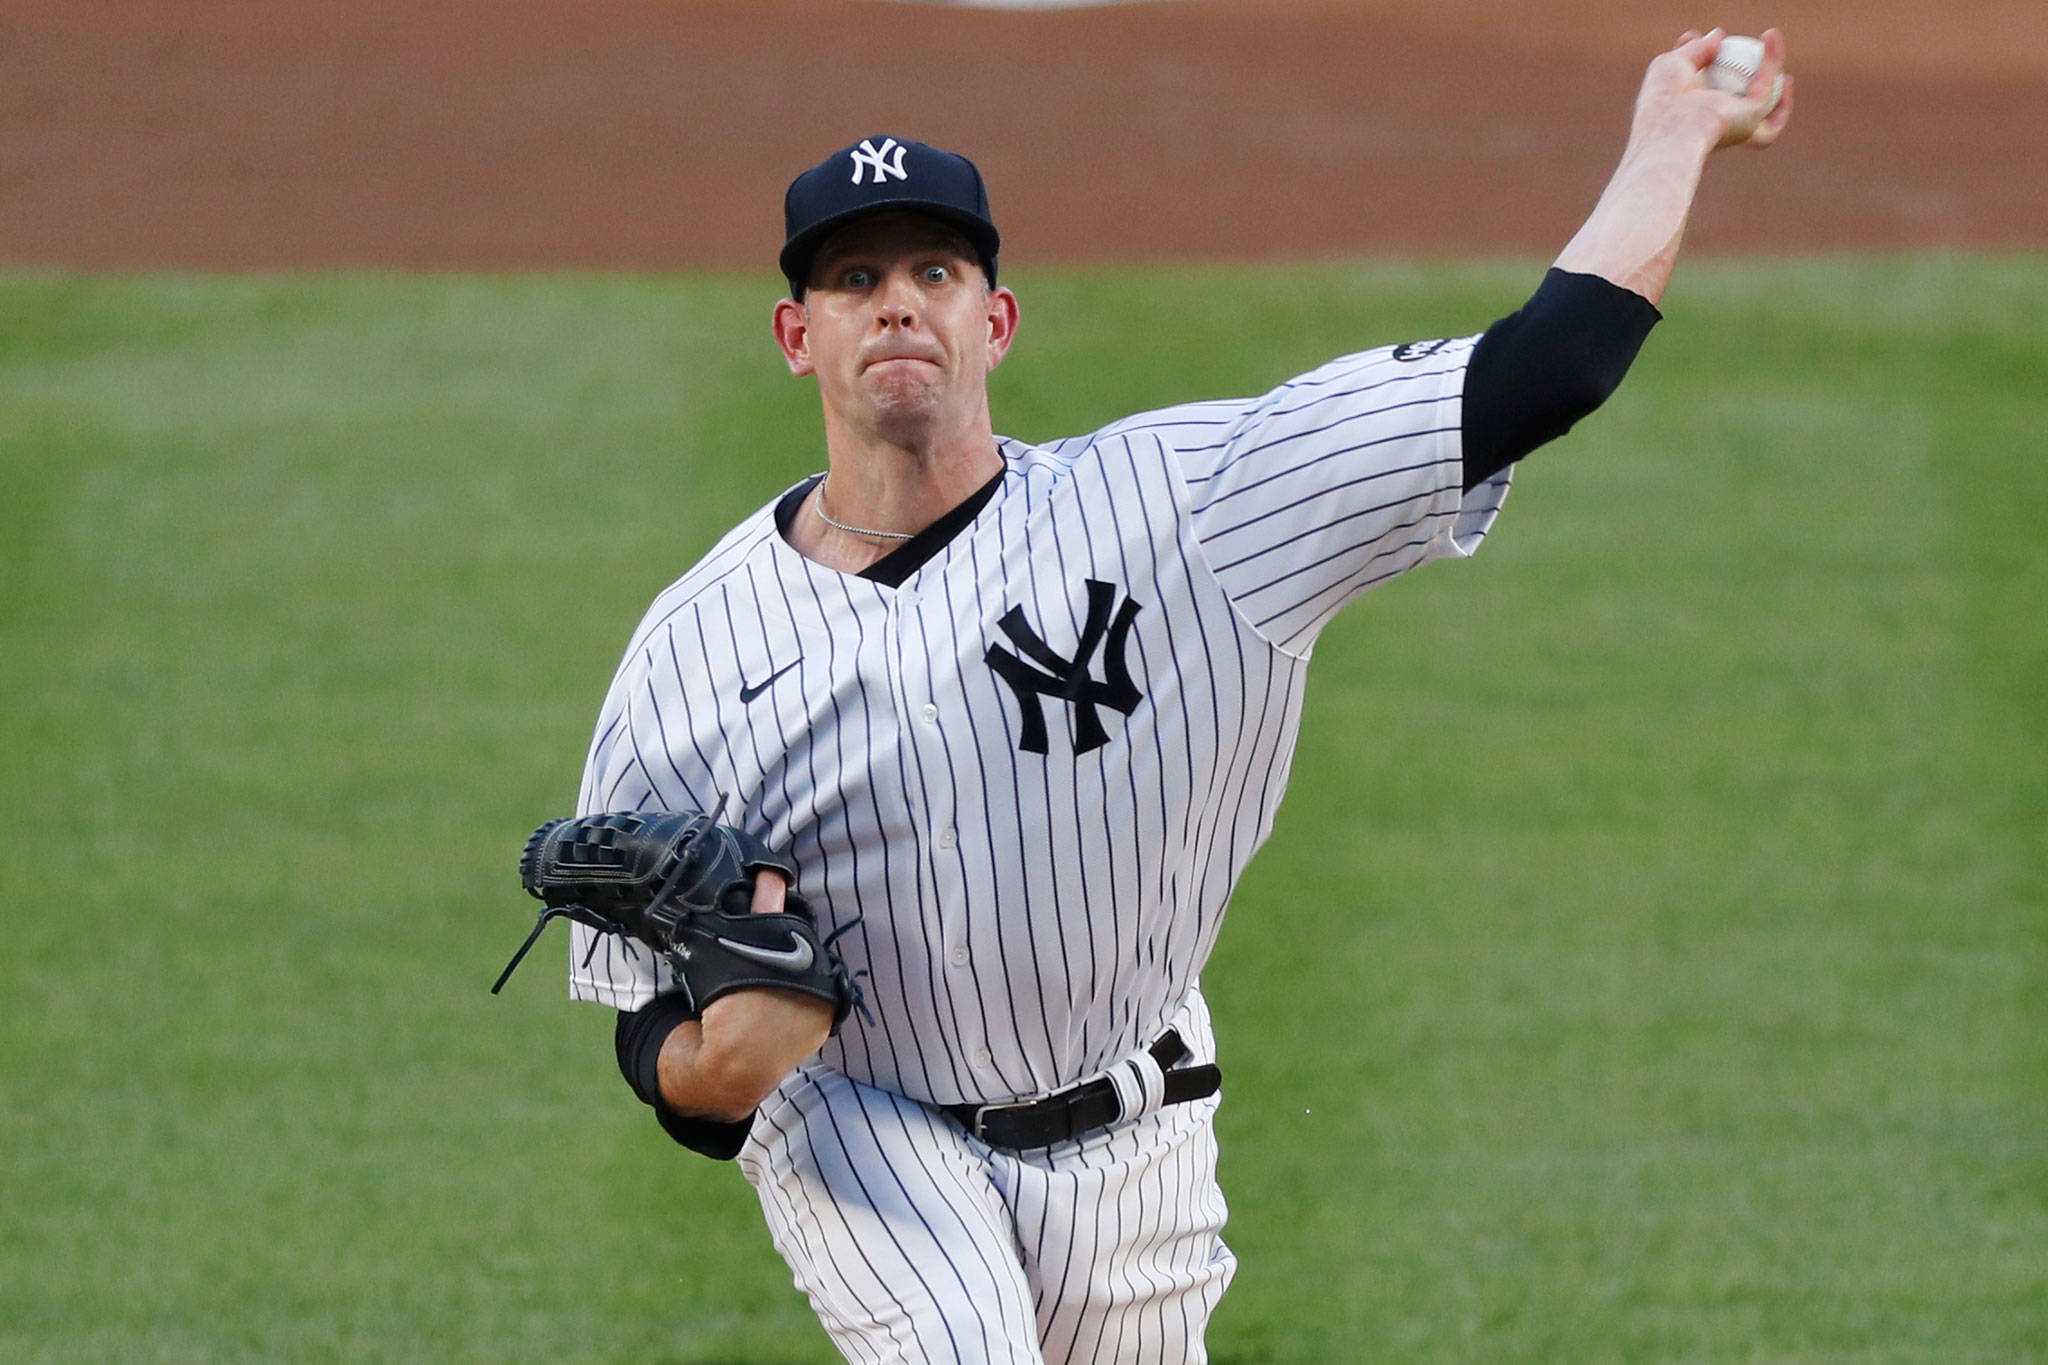 Yankees starting pitcher James Paxton throws during the first inning of a game against the Red Sox on Aug. 2, 2020, in New York. Paxton is returning to the Seattle Mariners after an injury-filled second season with New York. ( AP Photo/Kathy Willens)